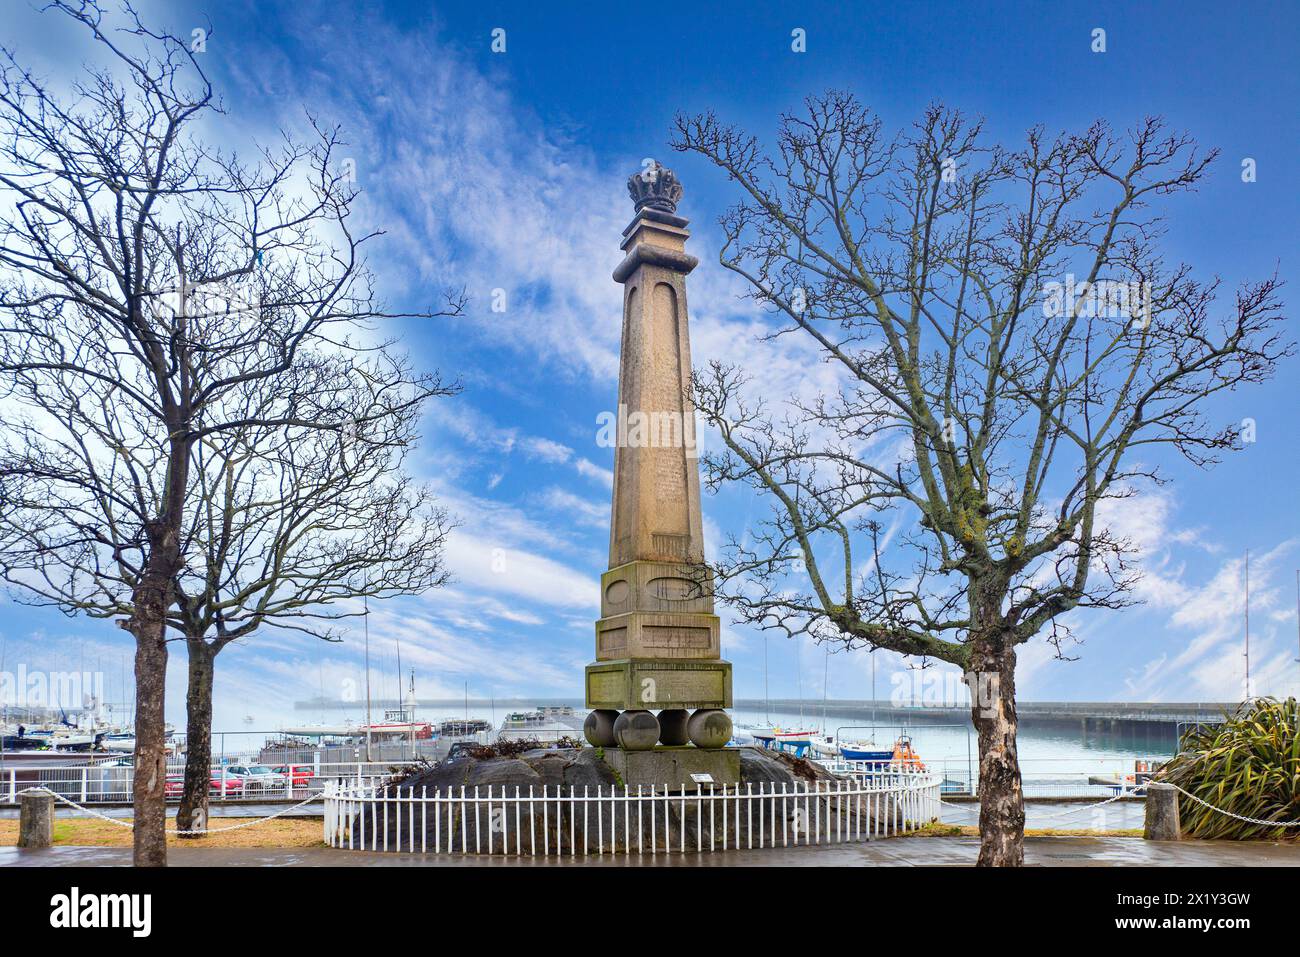 Harbourside King George IV Obelisk at Dun Laoghaire, once called Kingstown, County Dublin, Ireland Stock Photo